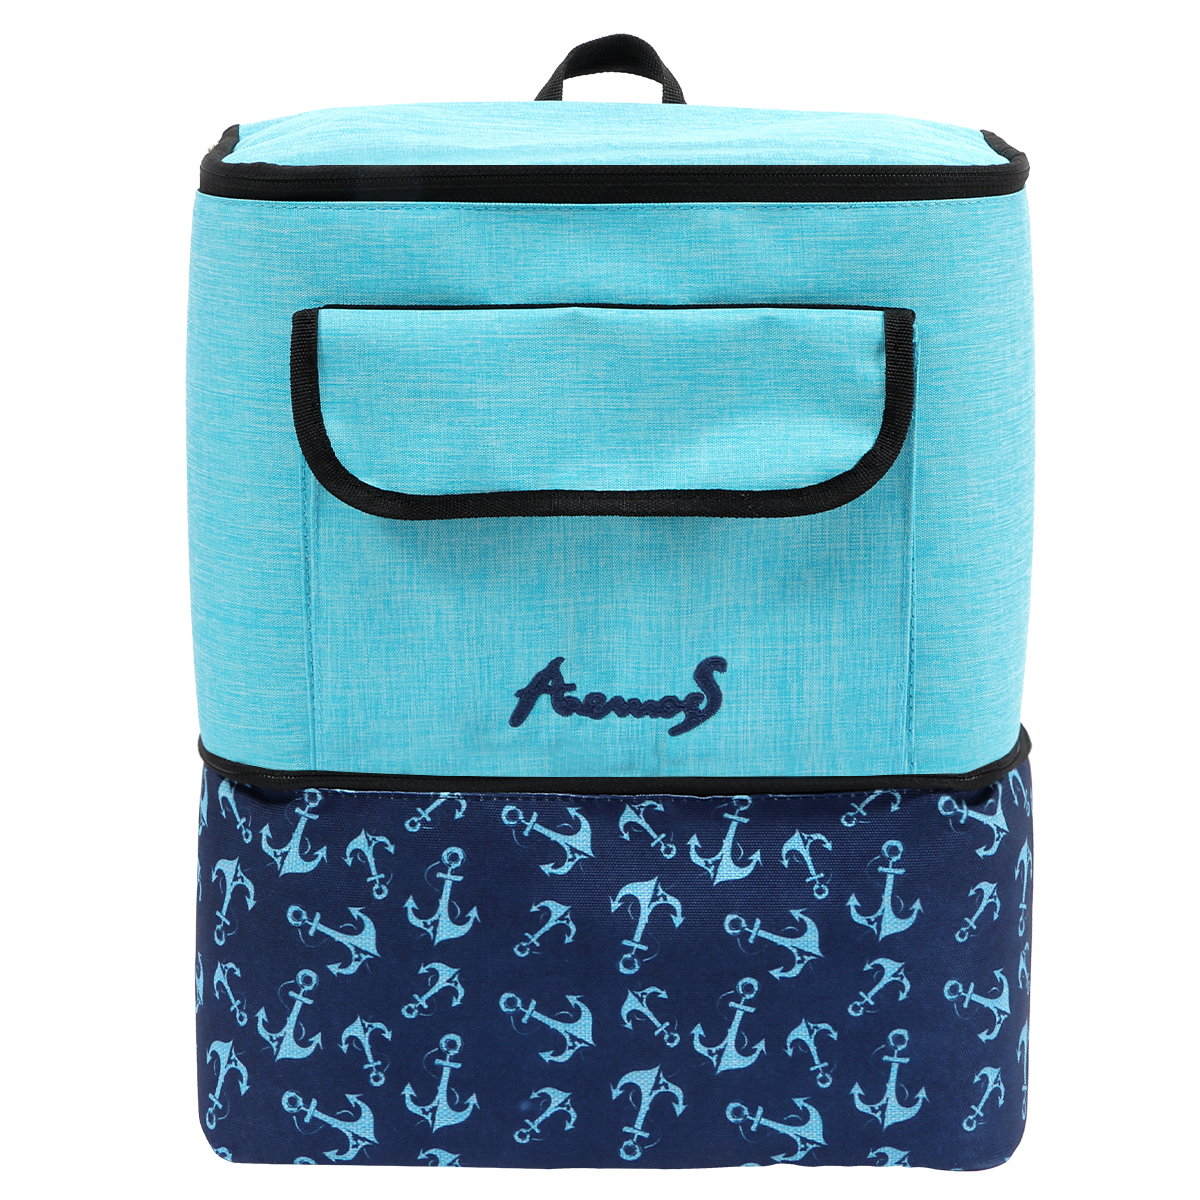 Anemoss sailboat insulated backpack